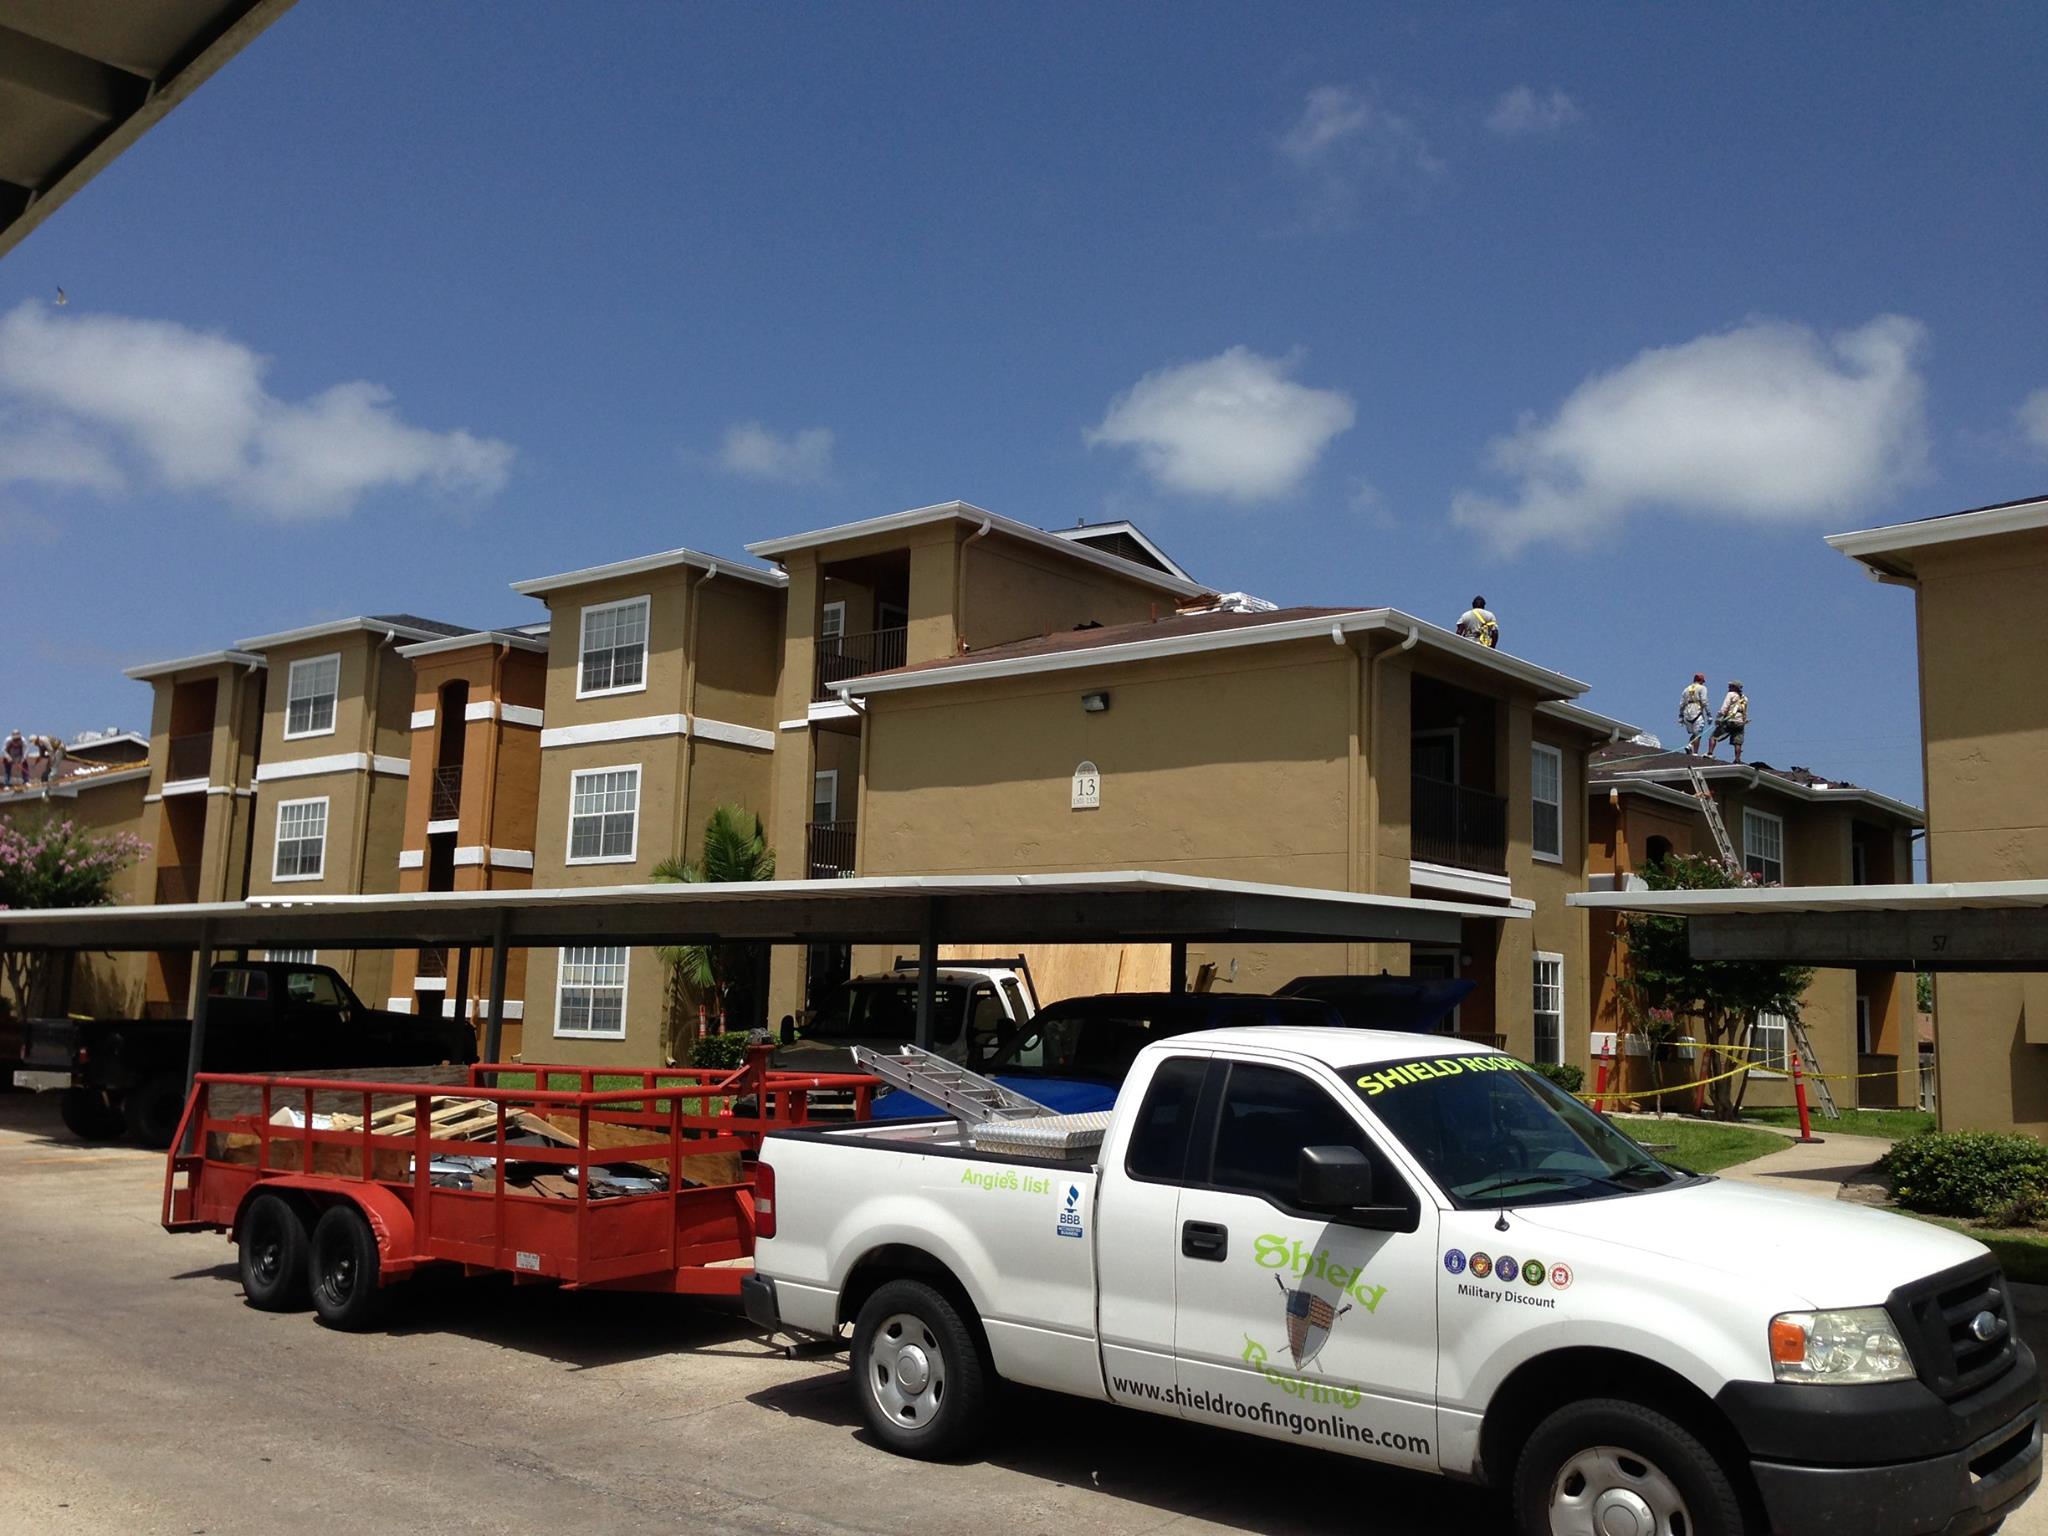   Roofing Companies In New Braunfels, Tx         